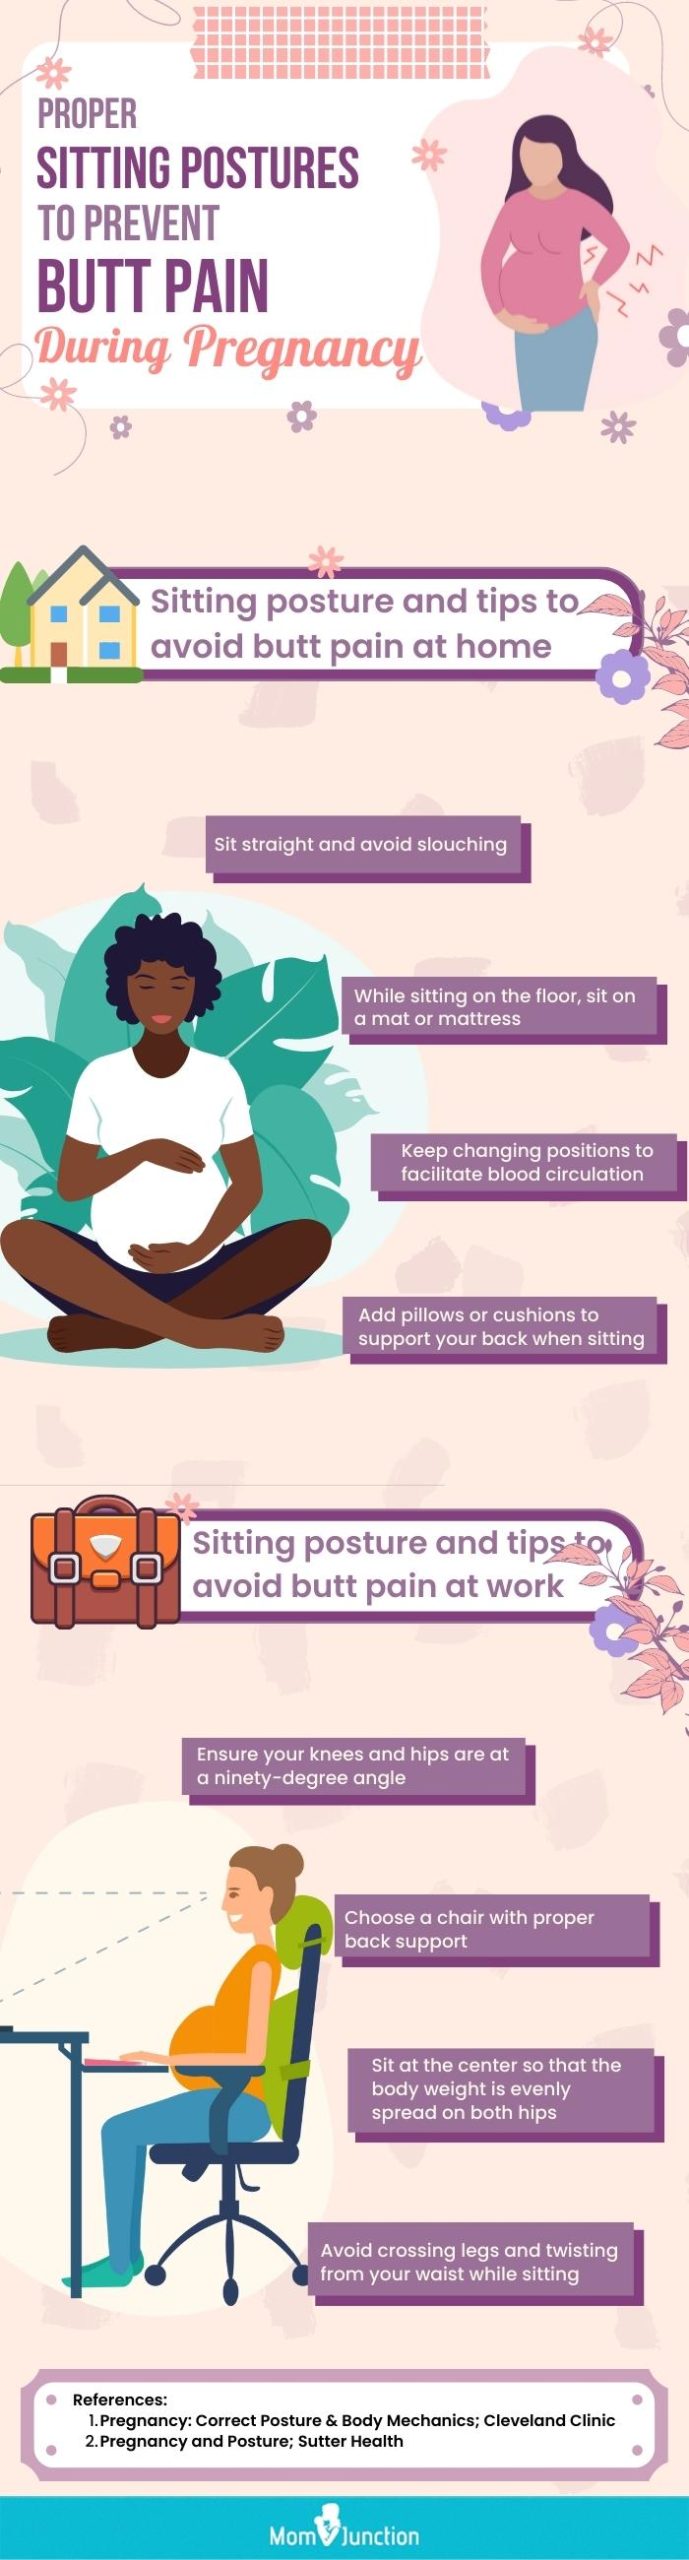 proper sitting postures to prevent butt pain during pregnancy [infographic]